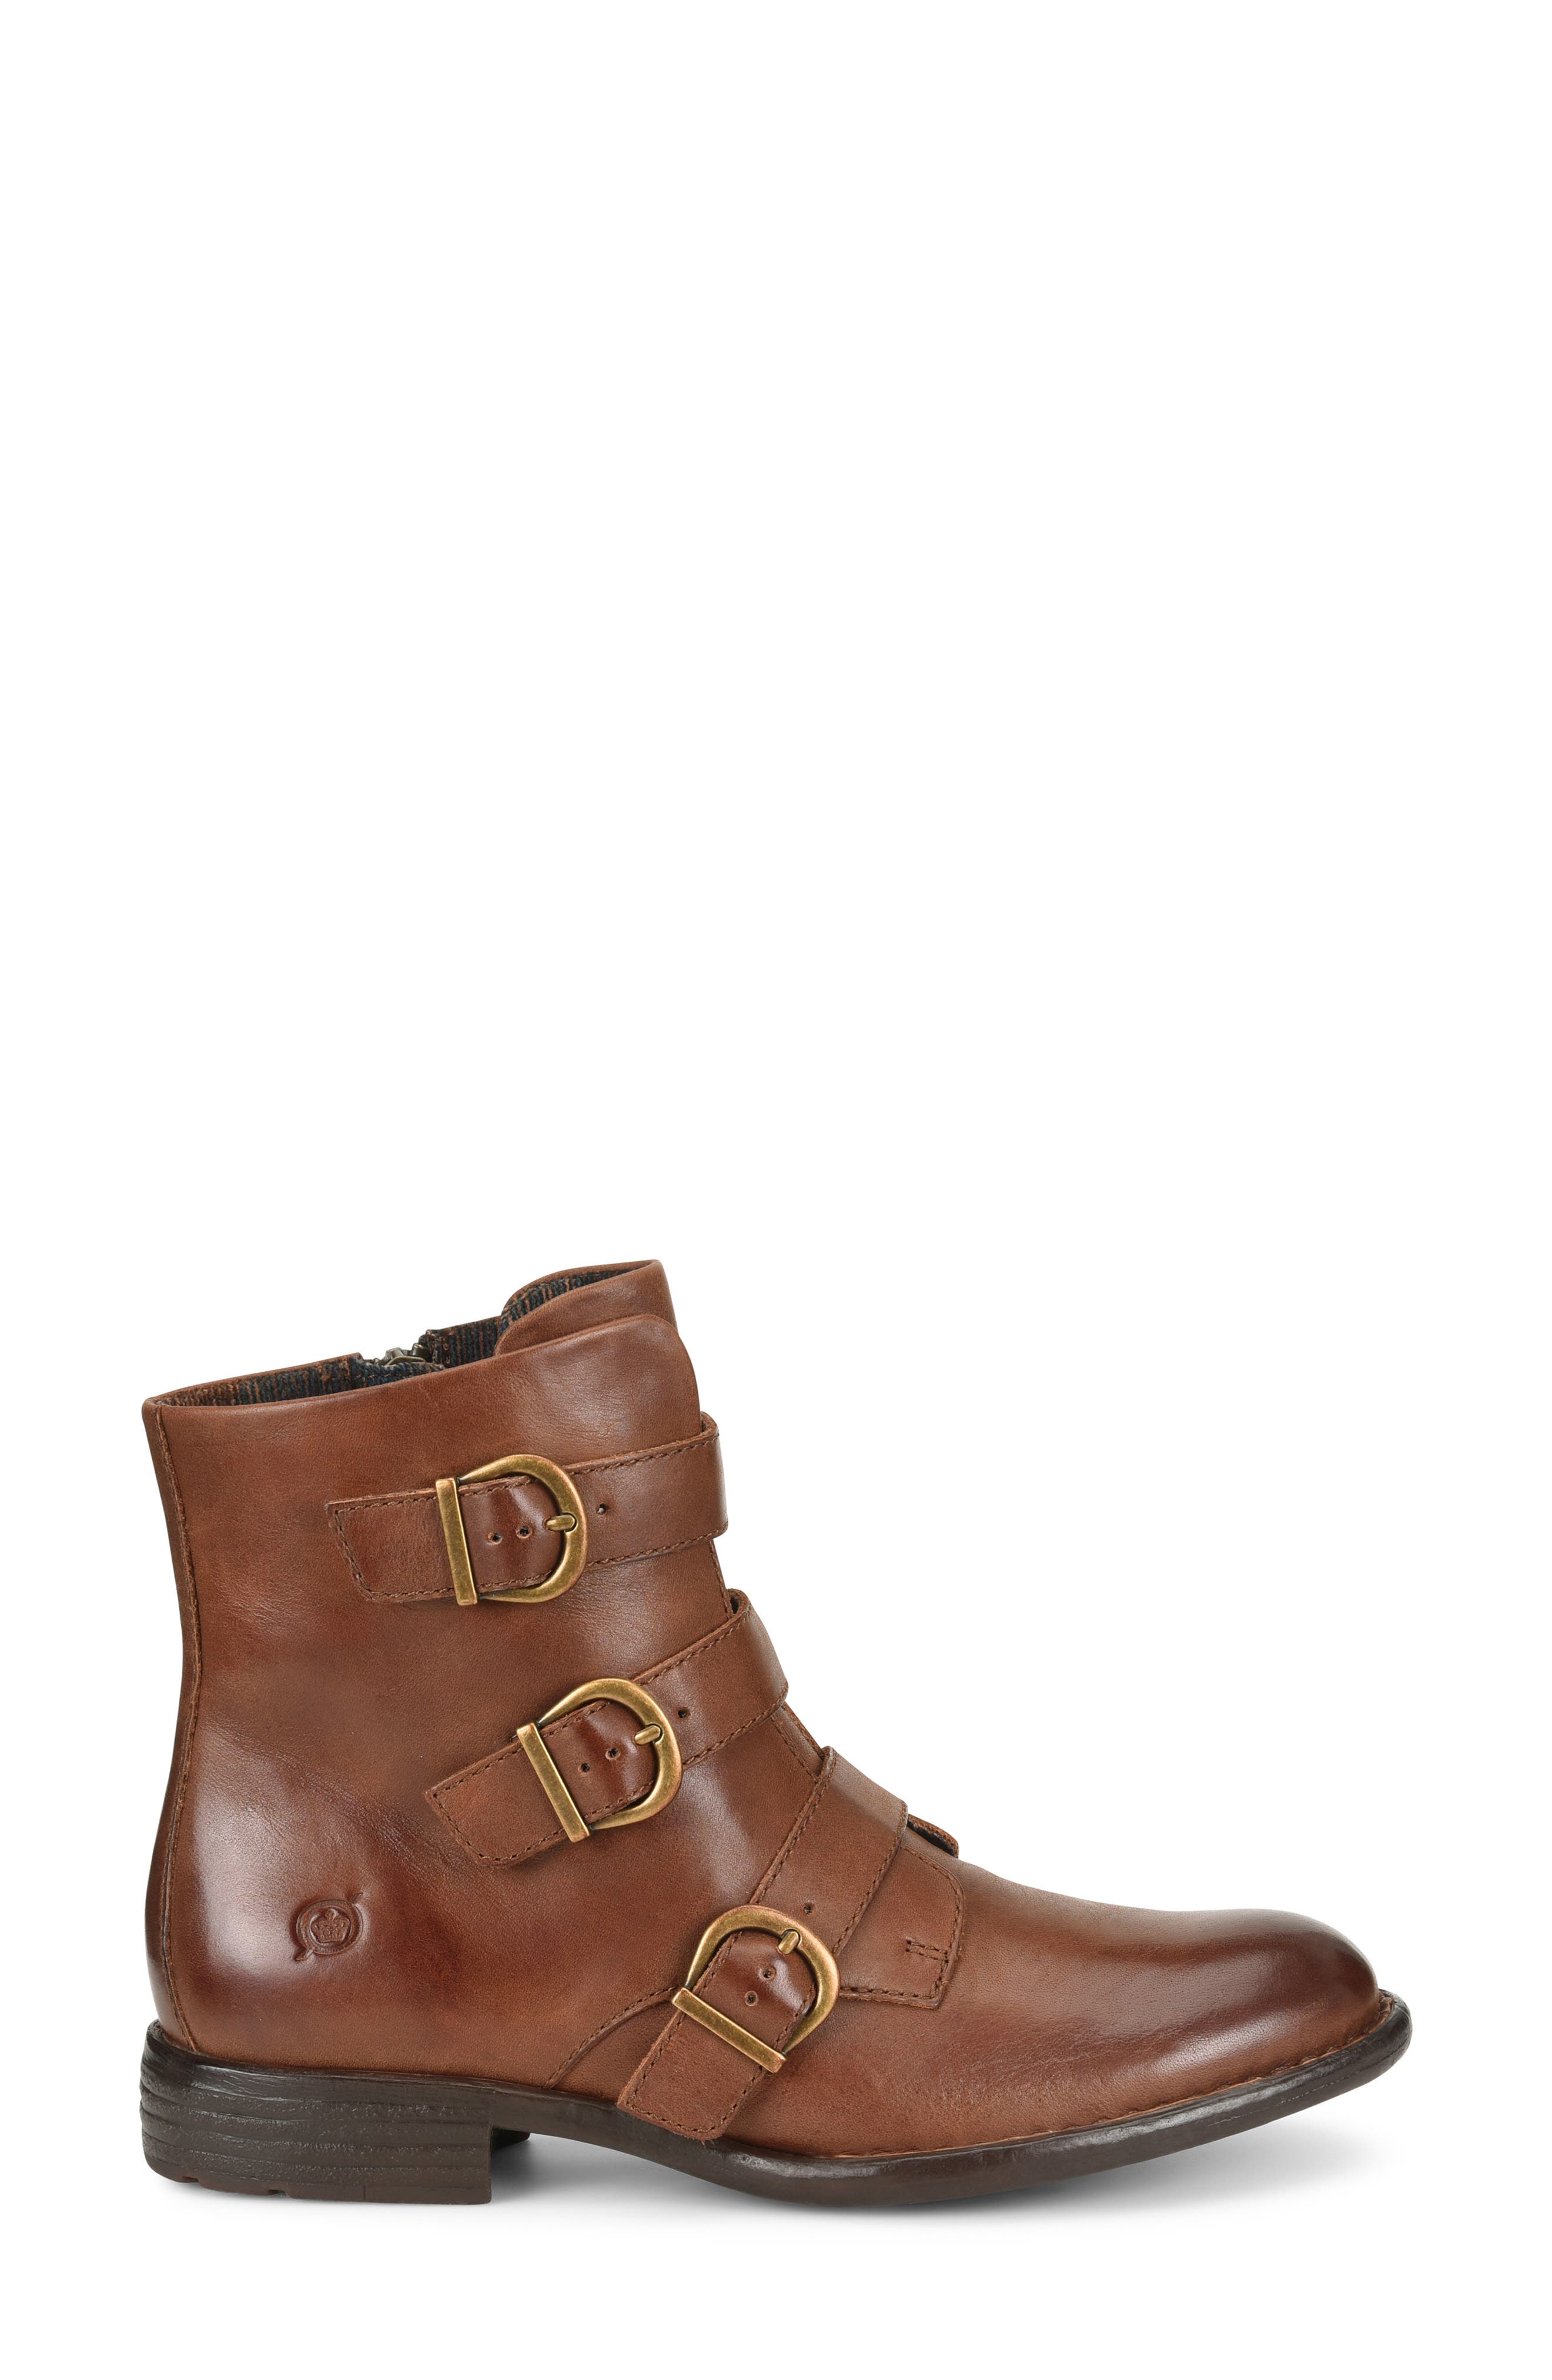 born buckle leather boots